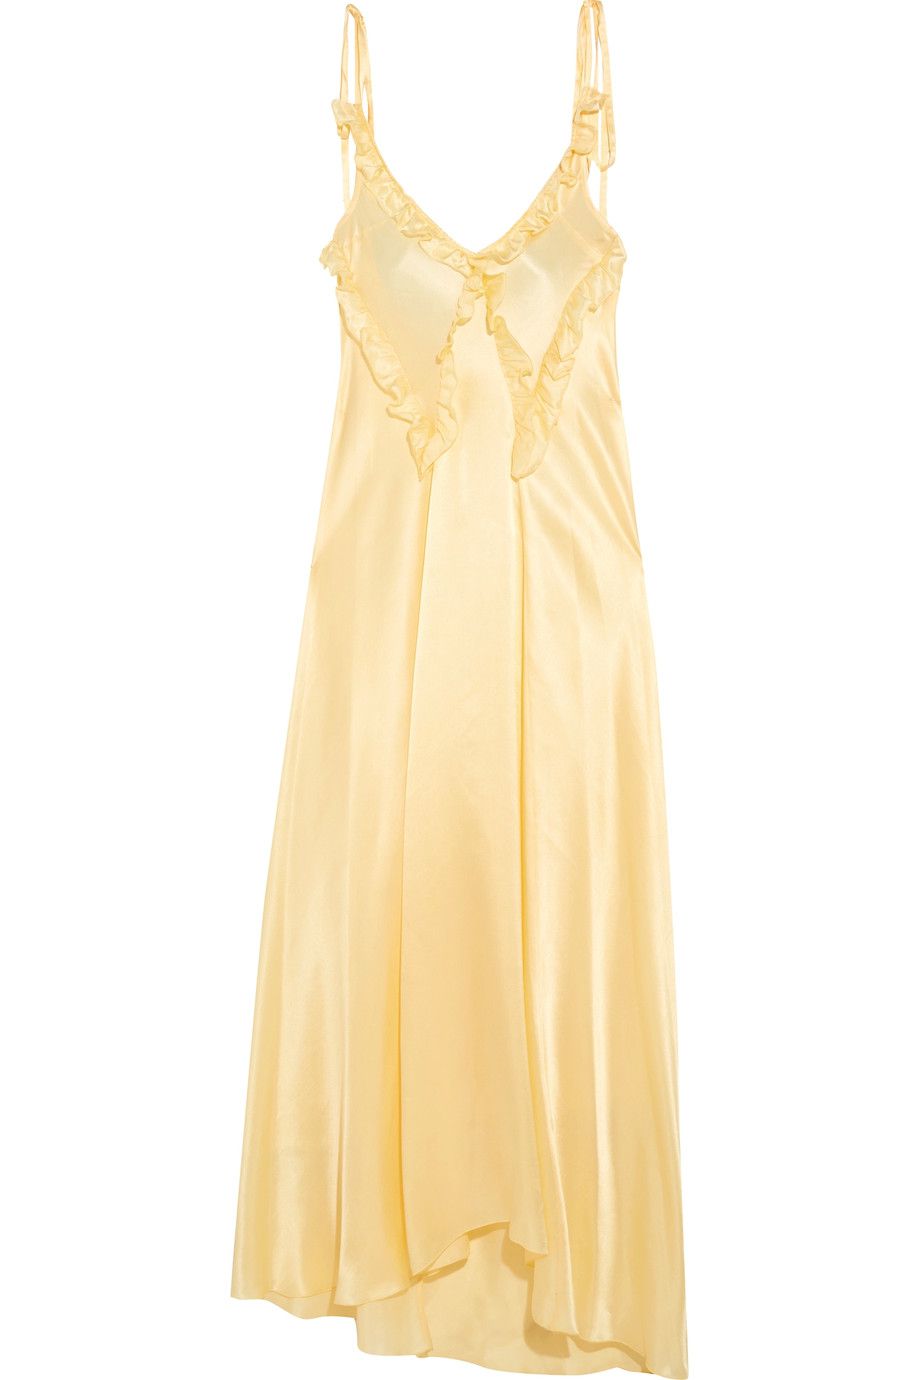 FRILLY YELLOW DRESS